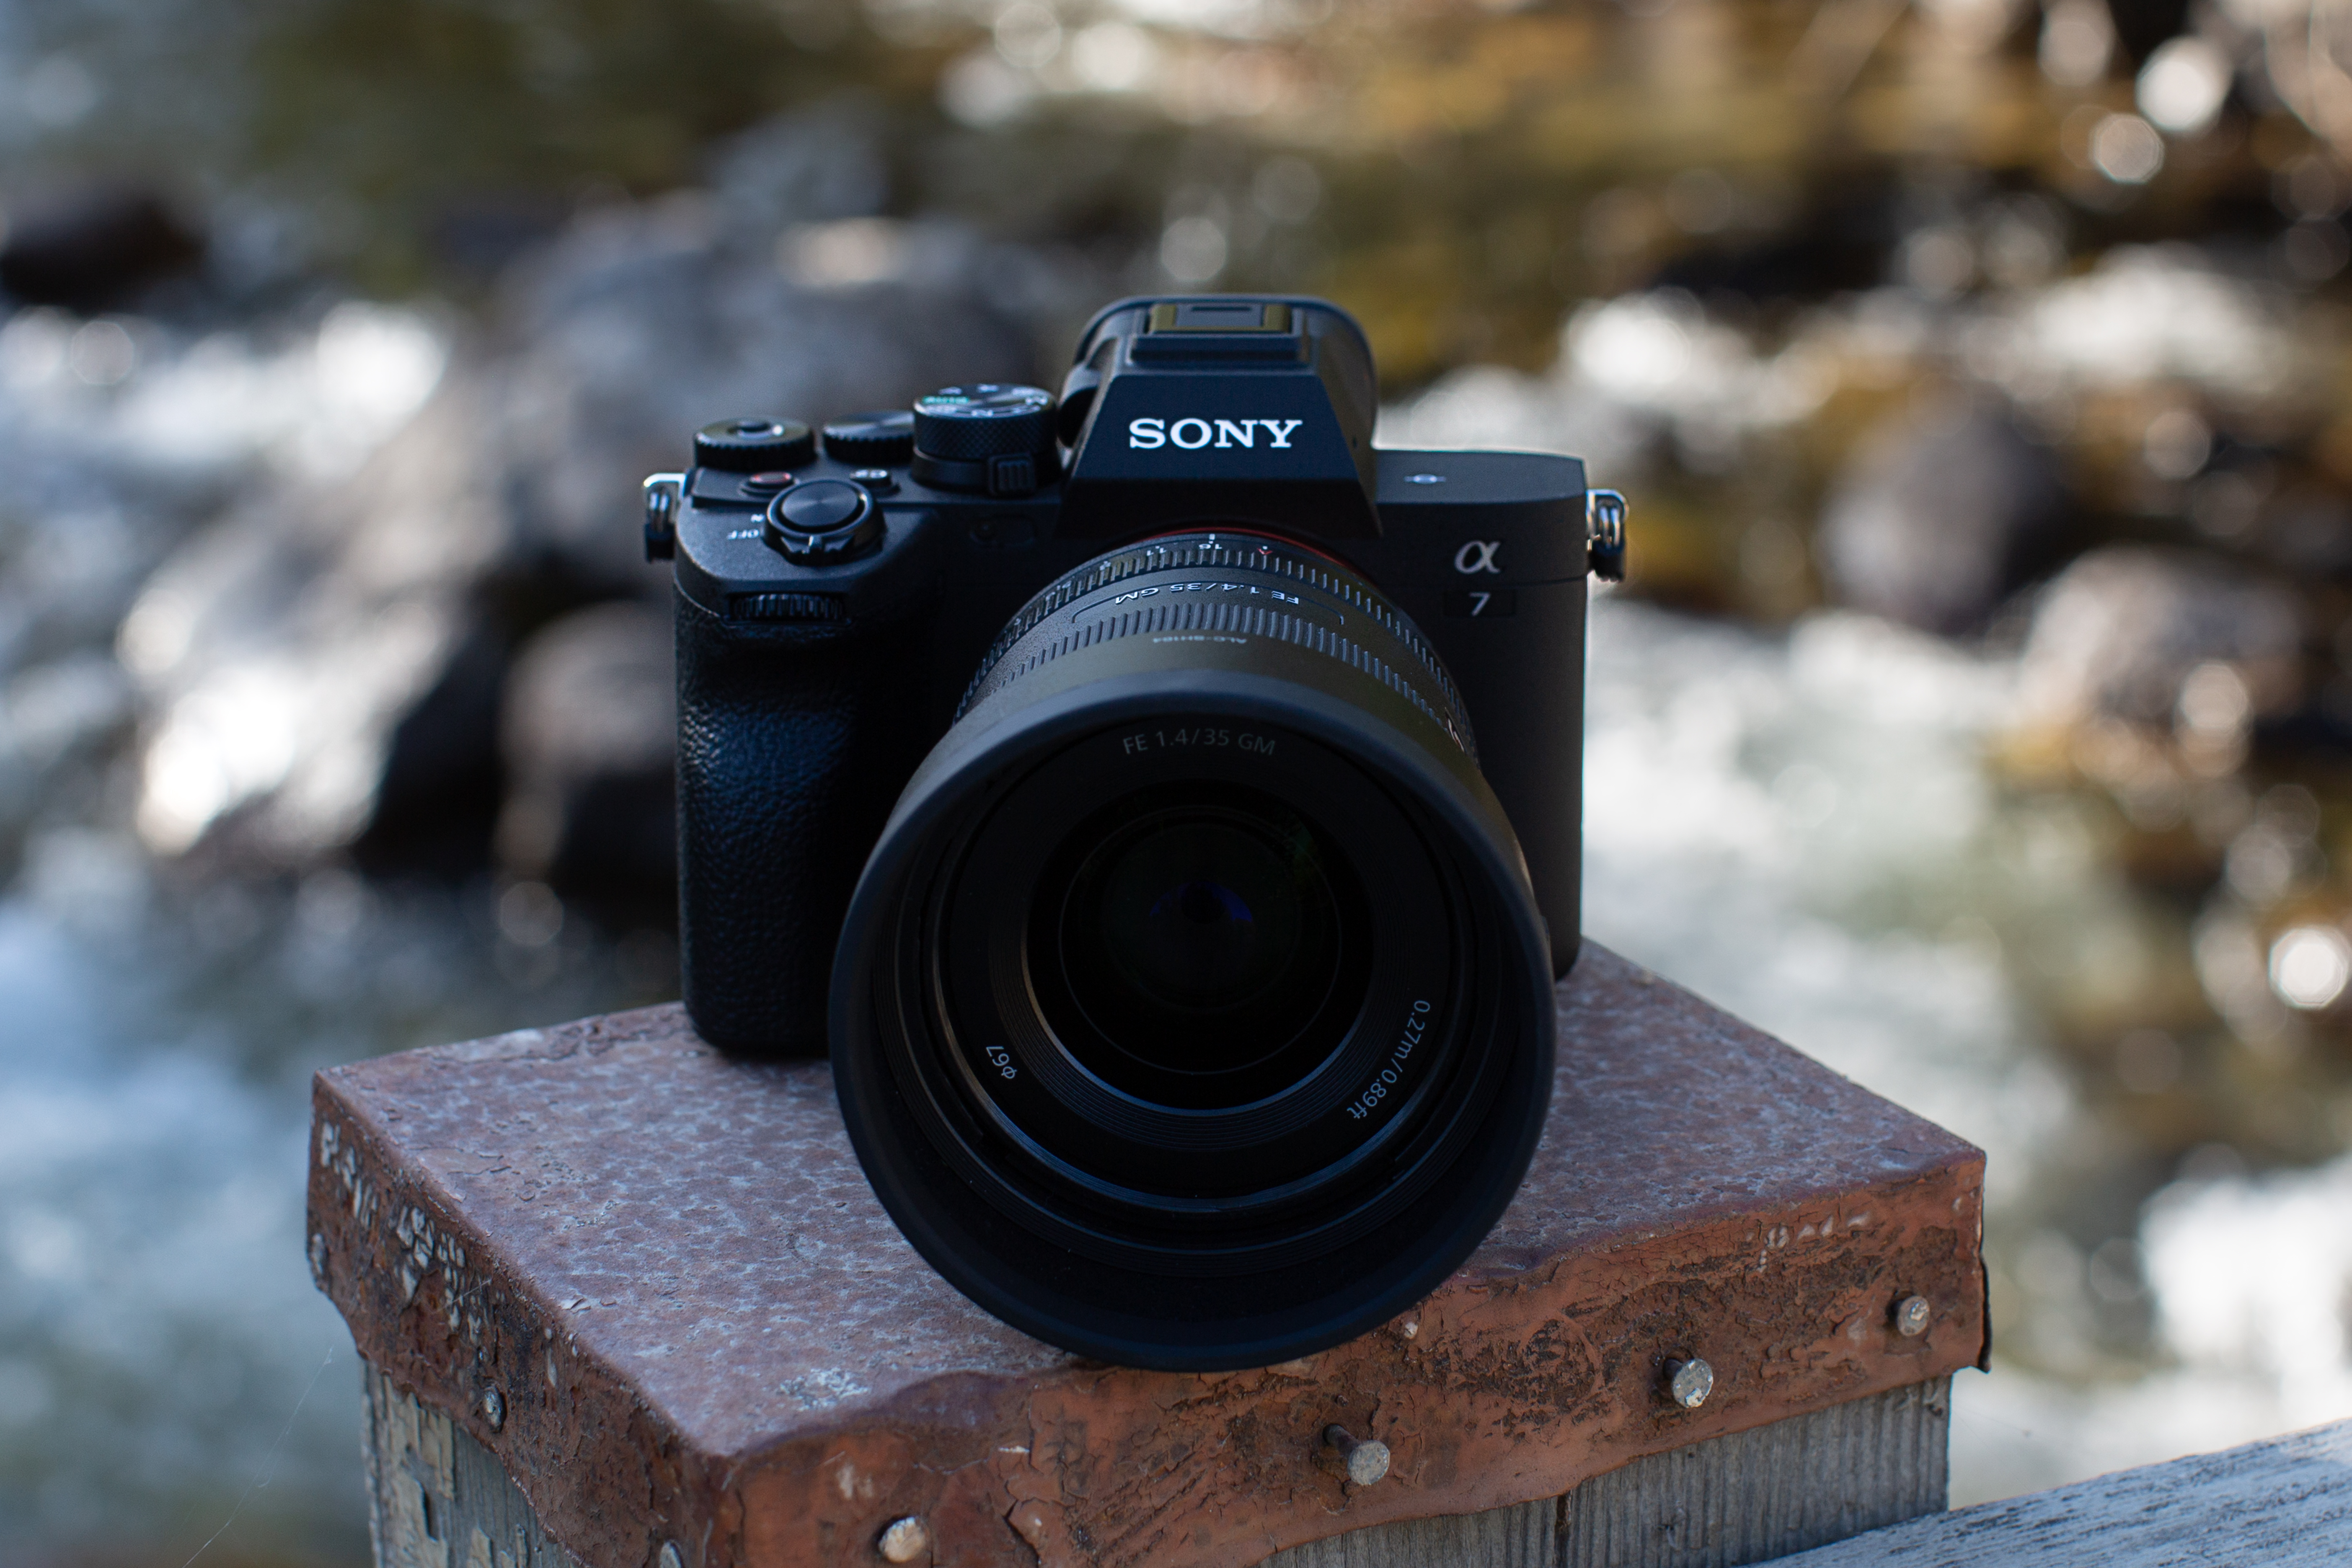 Get the Sony a7 IV with a 24-105mm Lens for $200 Less